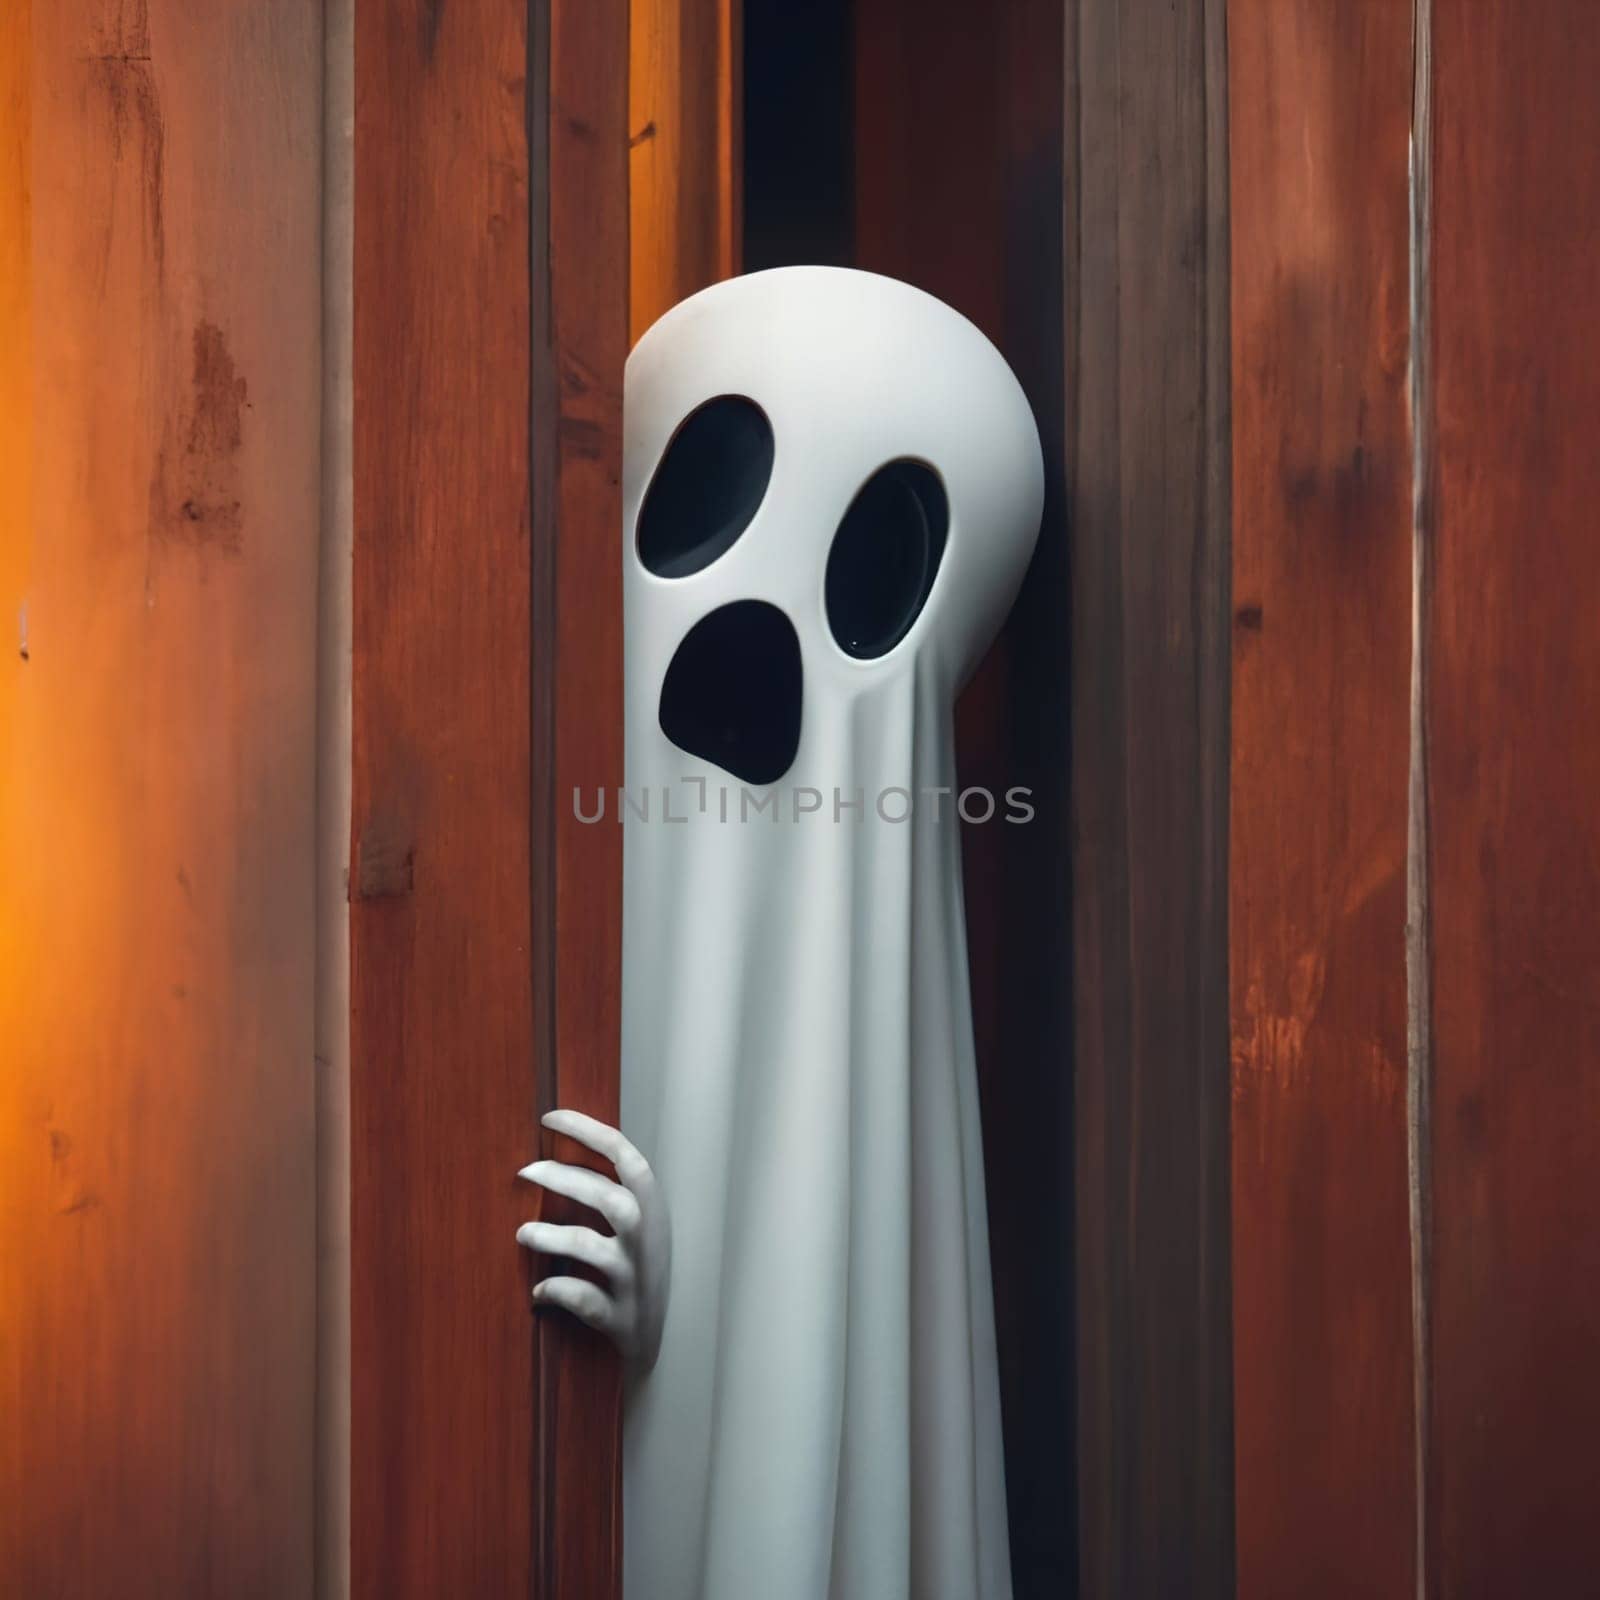 Cute Funny Ghost Peeks from Wall Corner - Playful and Adorable Ghost Illustration by igor010